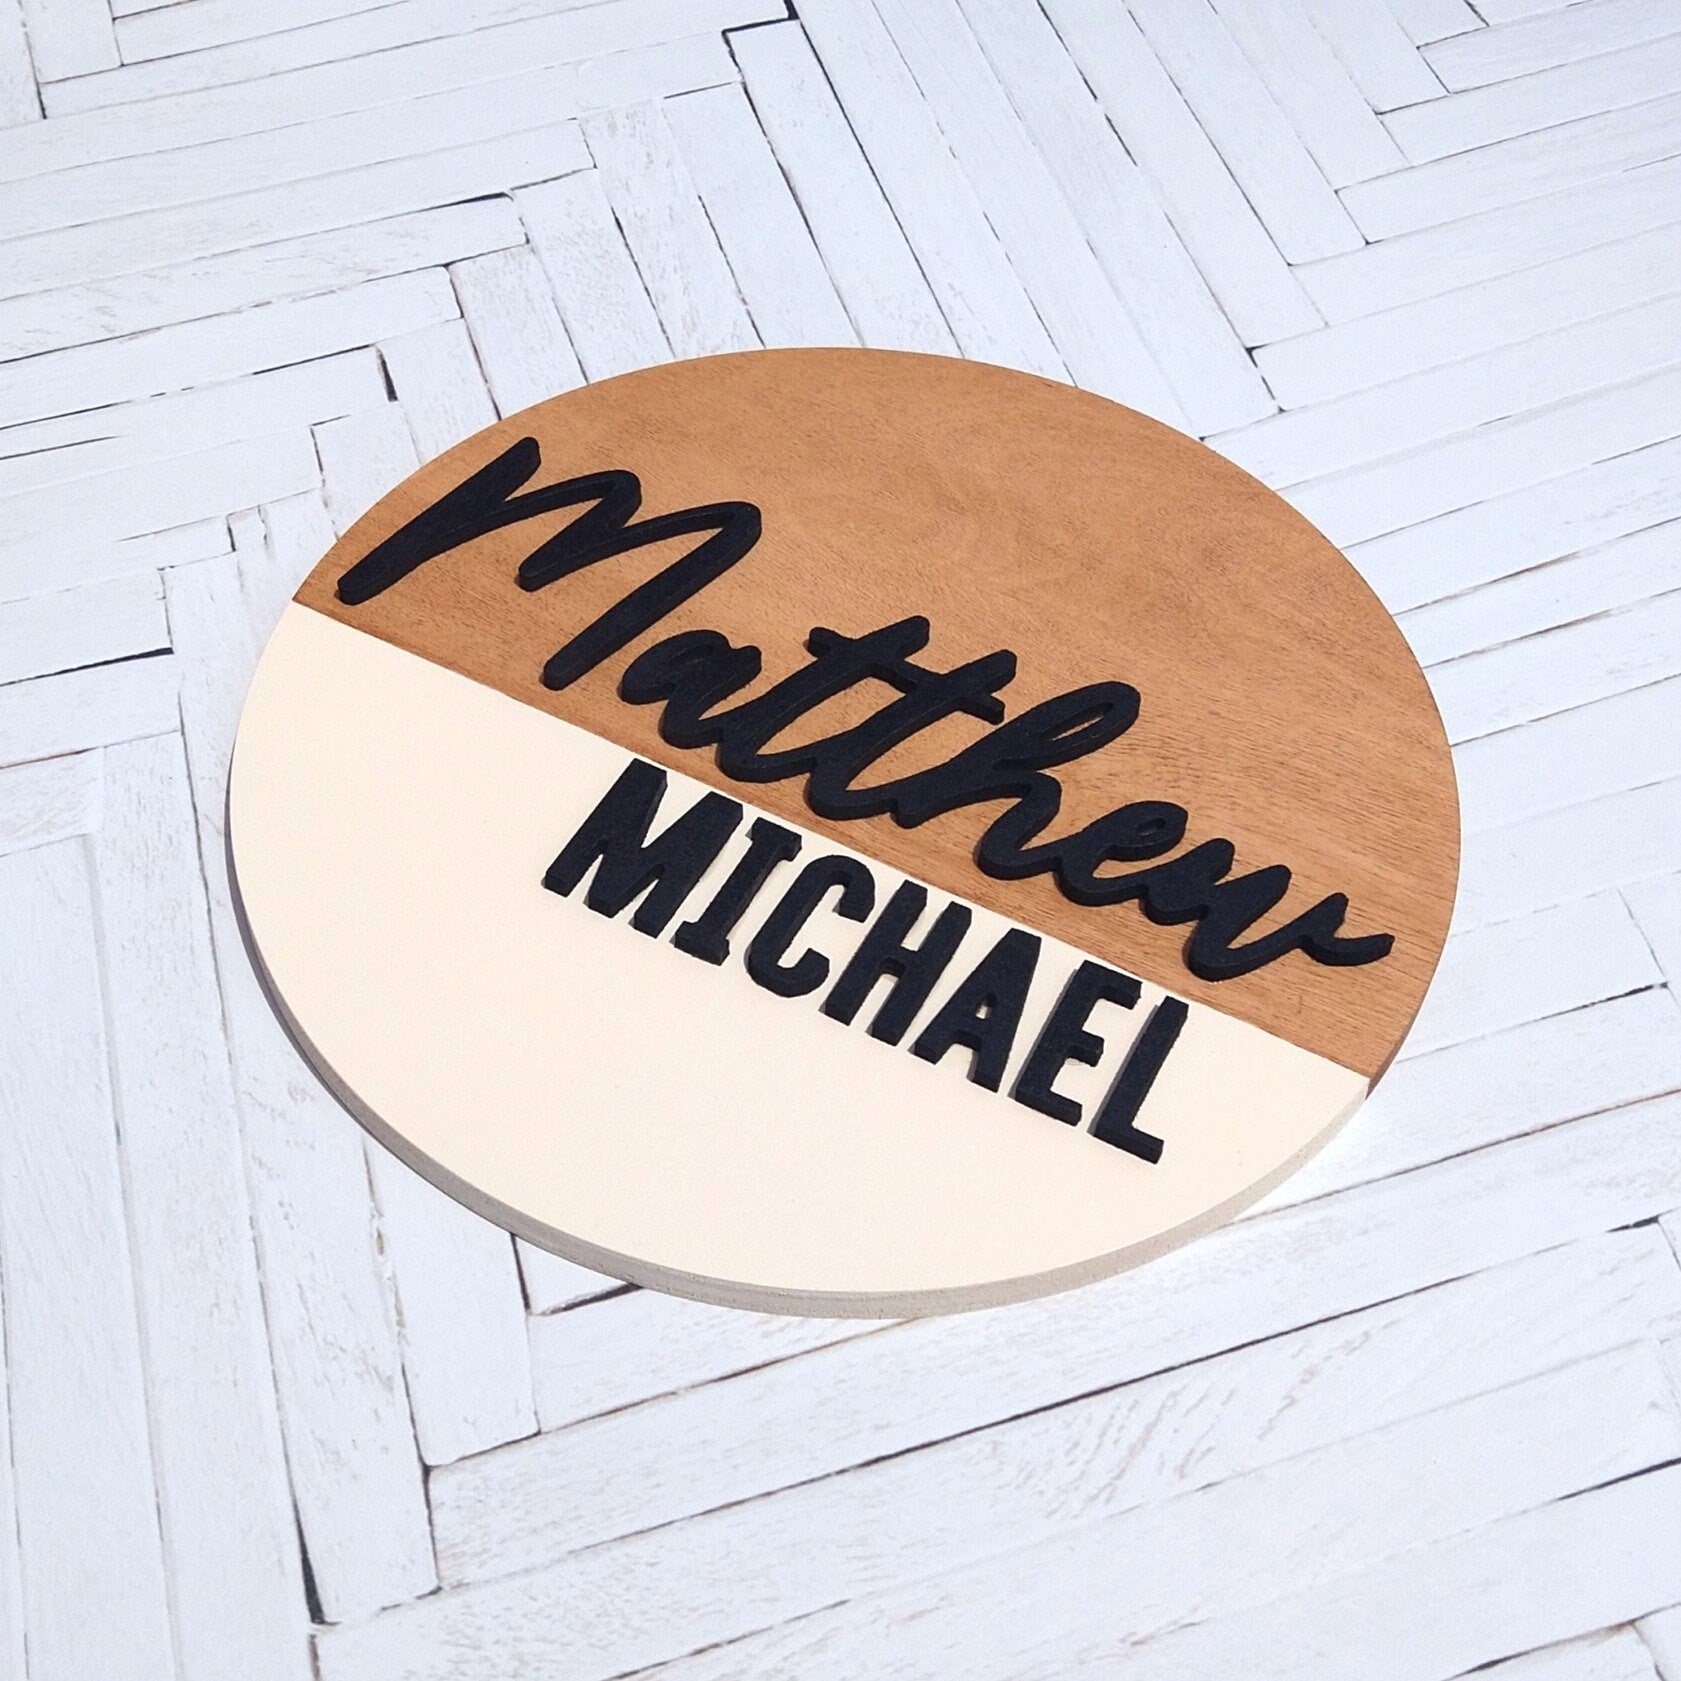 Personalized Baby Nursery Custom Name Sign, Wooden Circle Wall Decor, Baby Shower Present, Bedroom Decor, Above Crib Custom Color Round